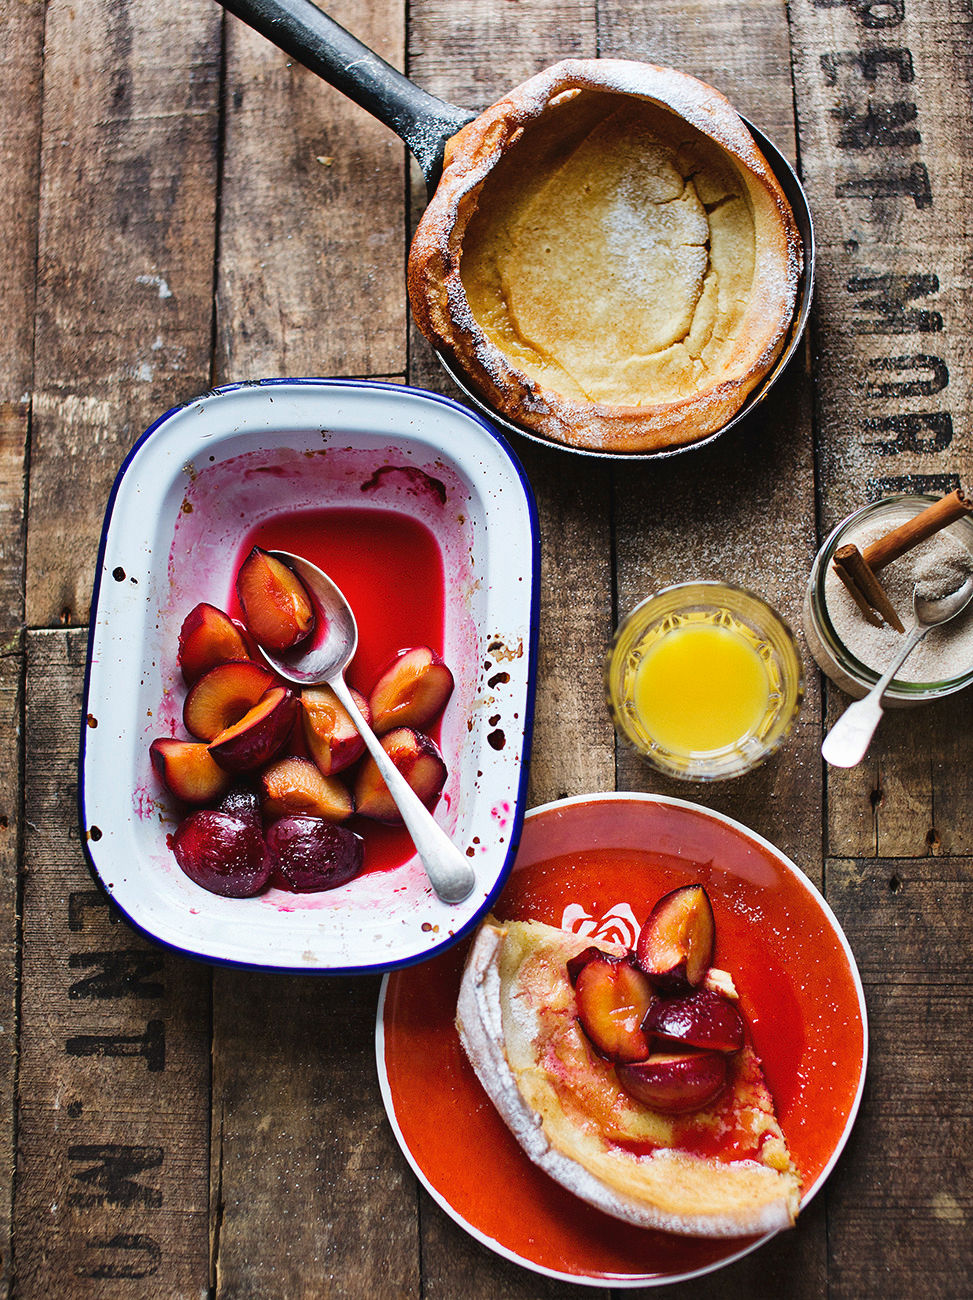 Dutch baby pancakes with roasted plums